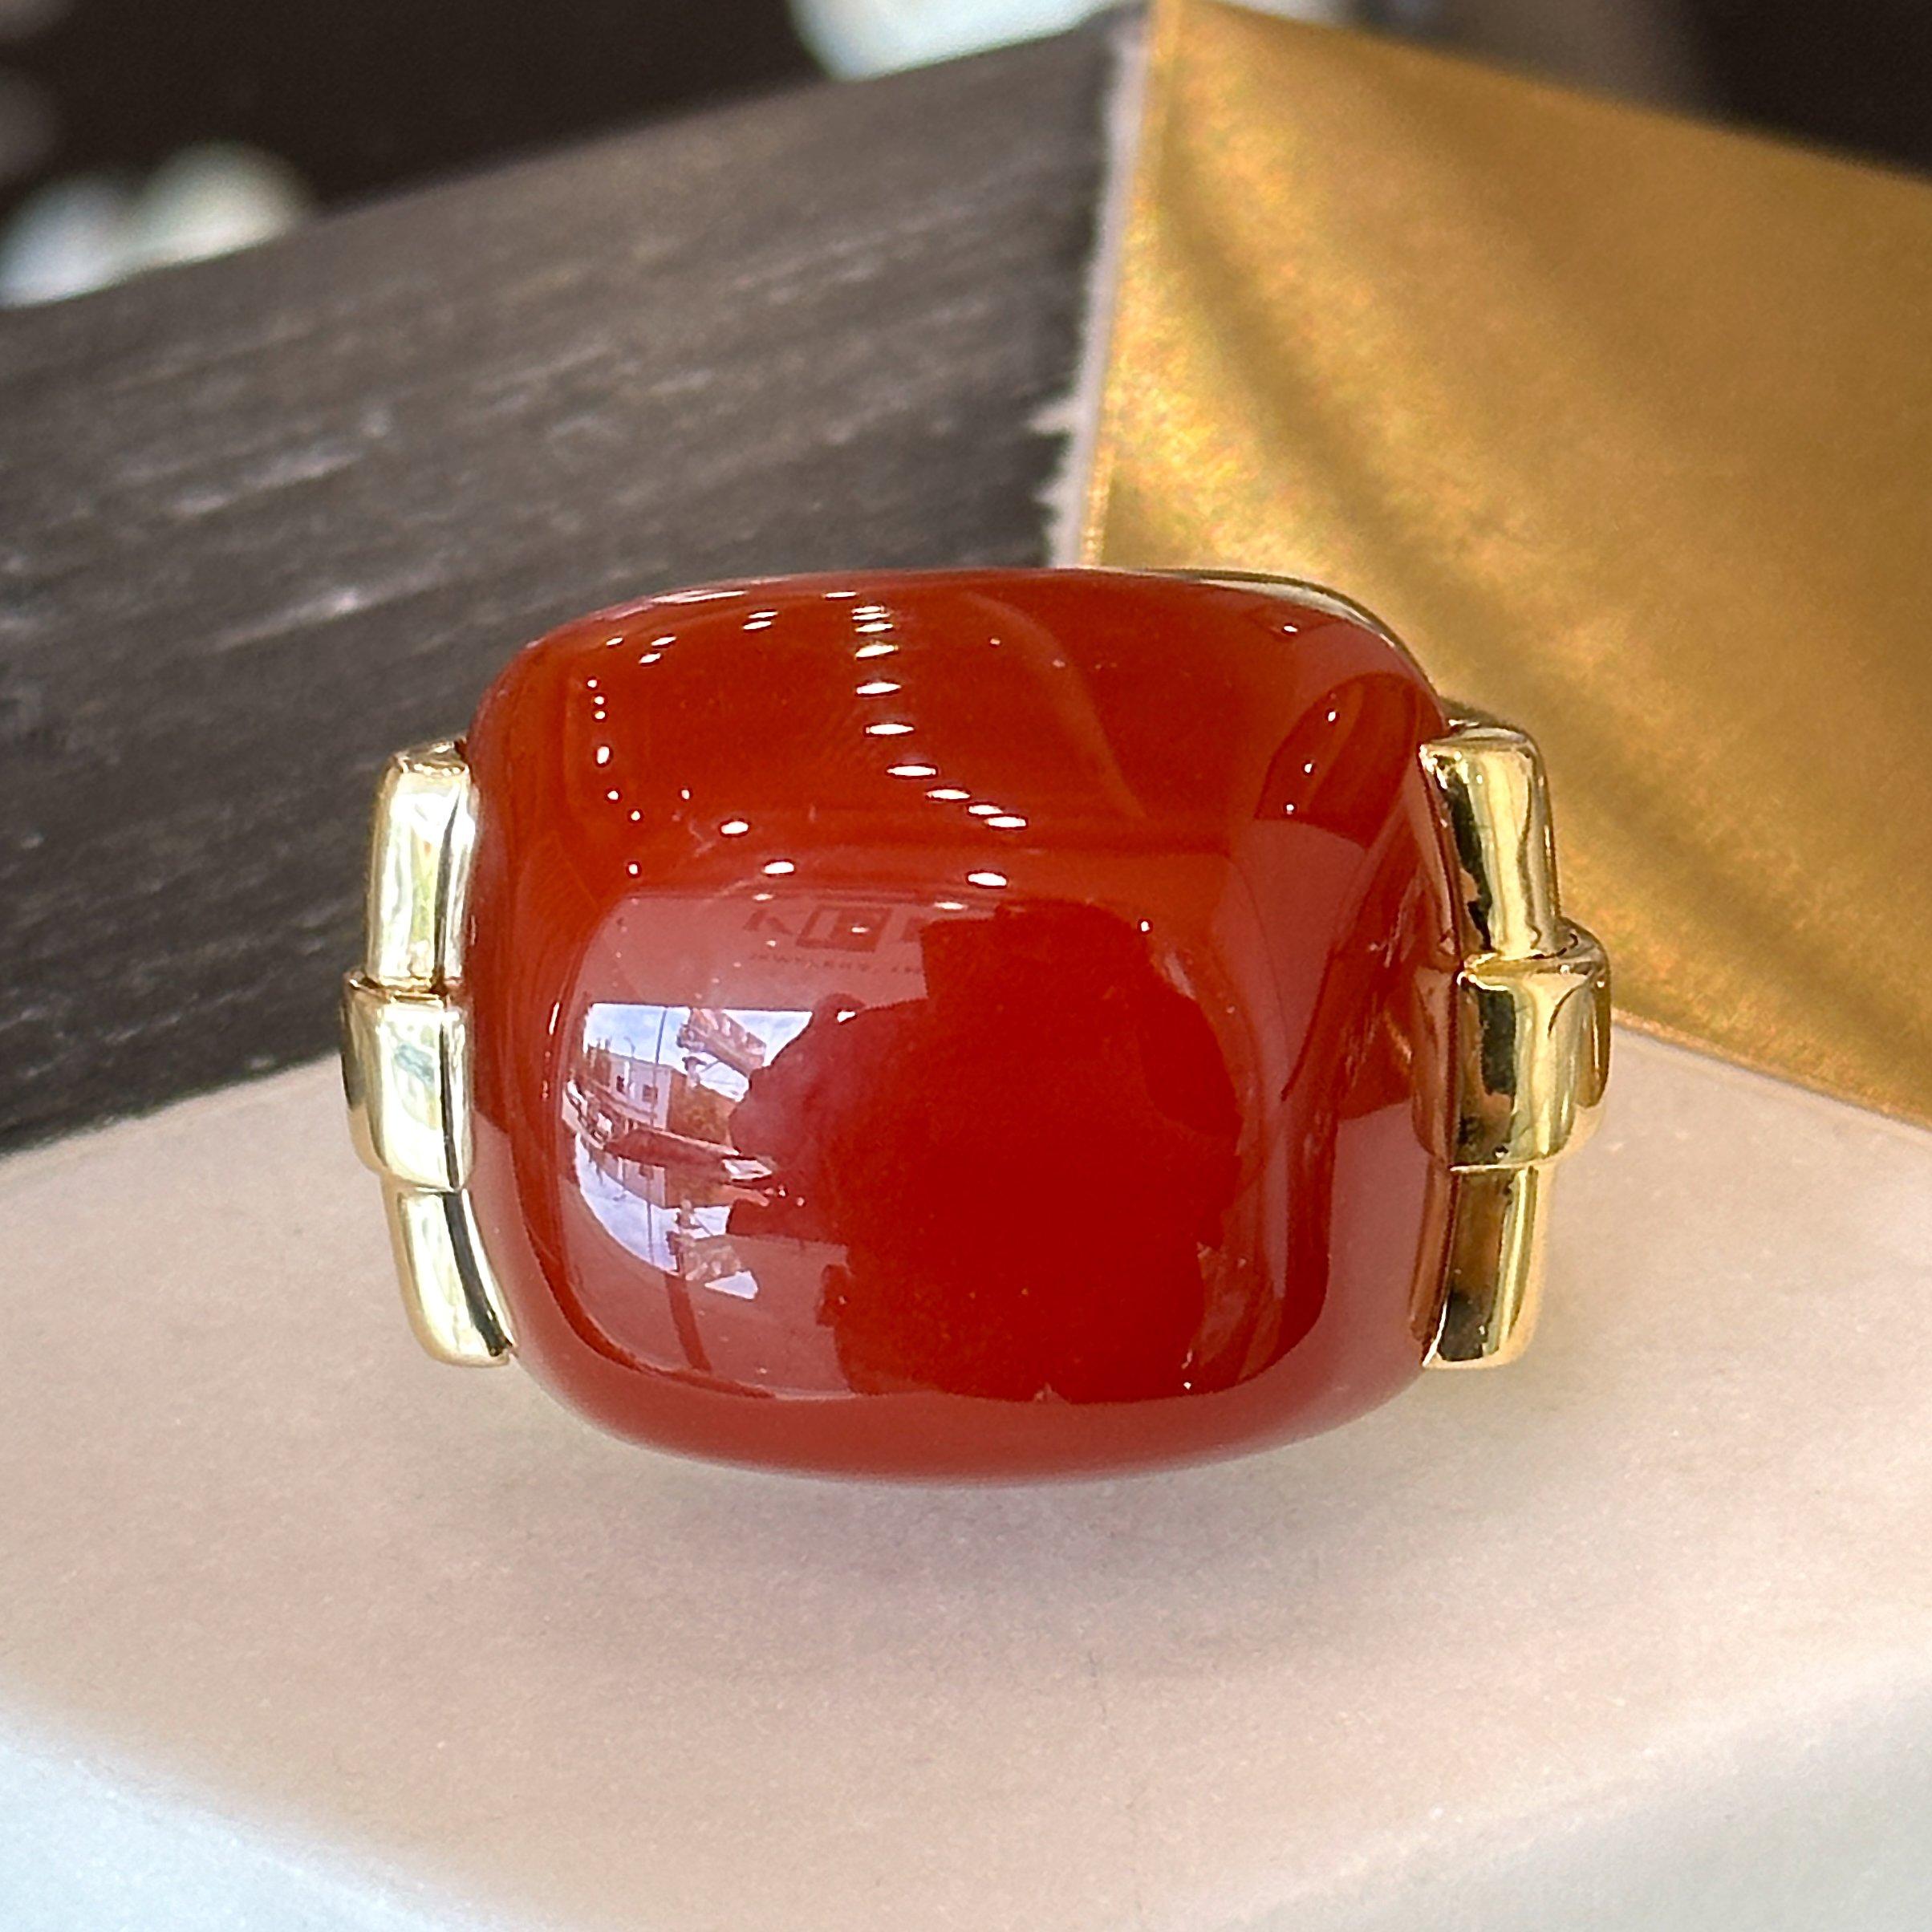 This vintage David Webb carnelian cabochon cocktail rings dates from the 1960’s and is crafted in 18KT yellow gold. The top of the ring measures 36mm x 26mm and its profile sits 38mm high. The ring is a size 5 with an adjustable ring guard inside.